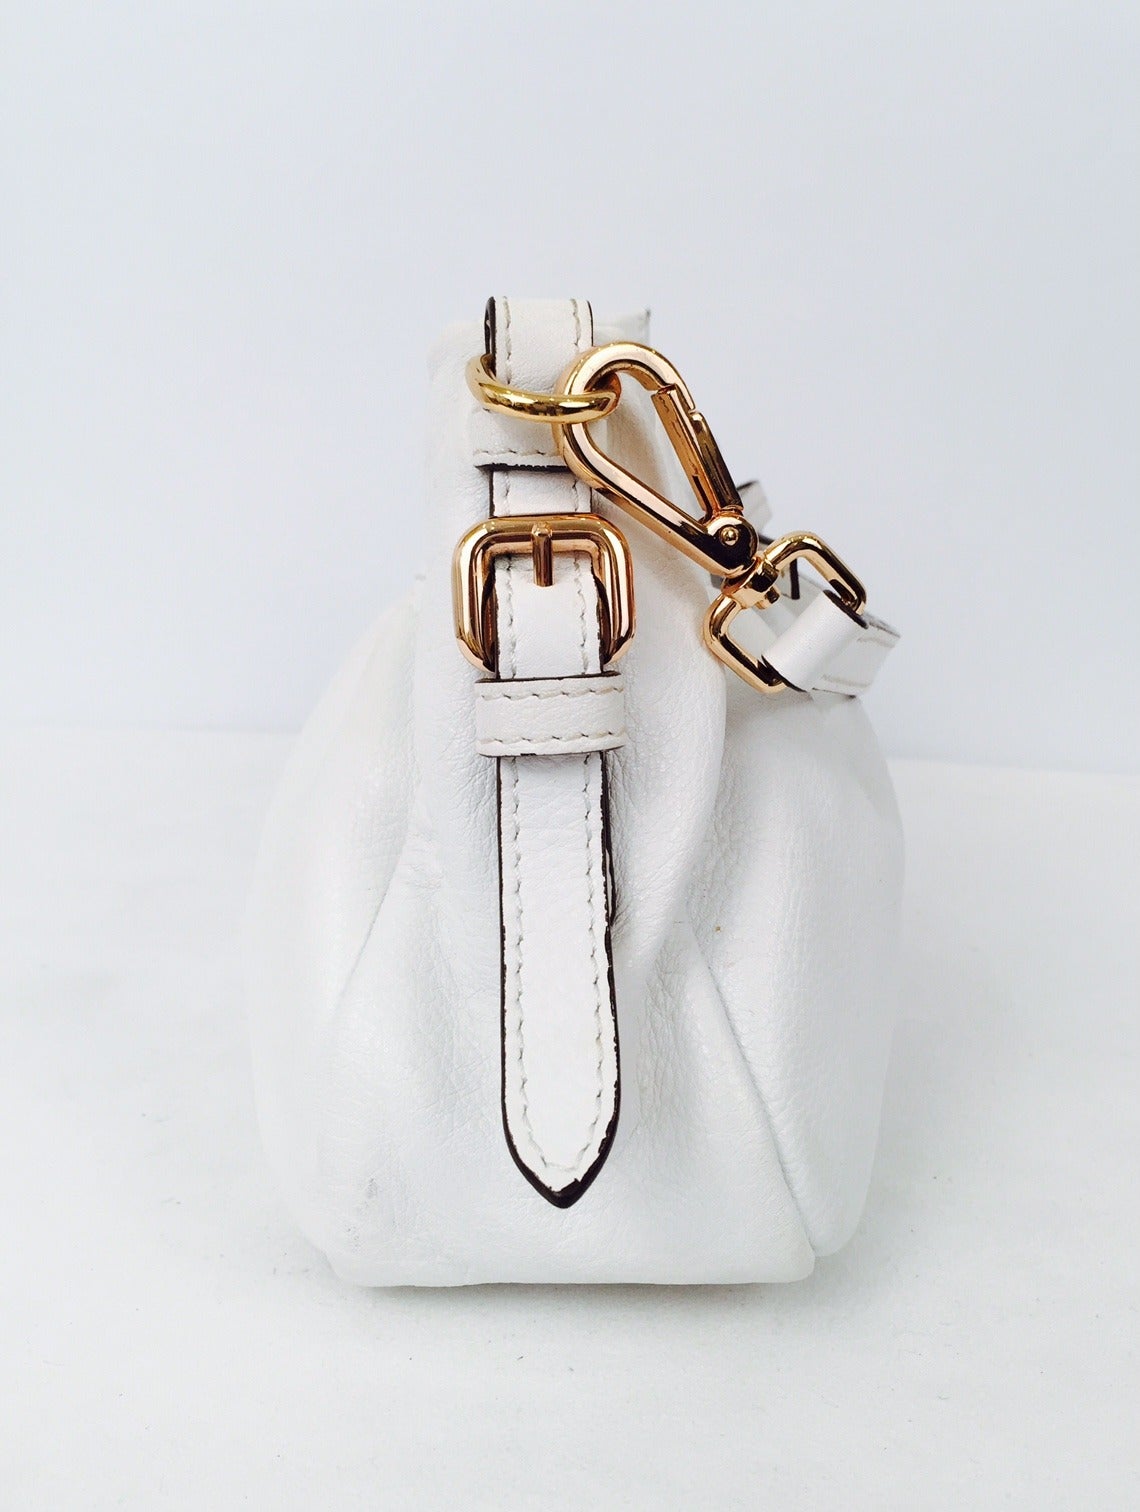 Prada White Satchel Bag with Detachable Shoulder Strap In Excellent Condition For Sale In Palm Beach, FL